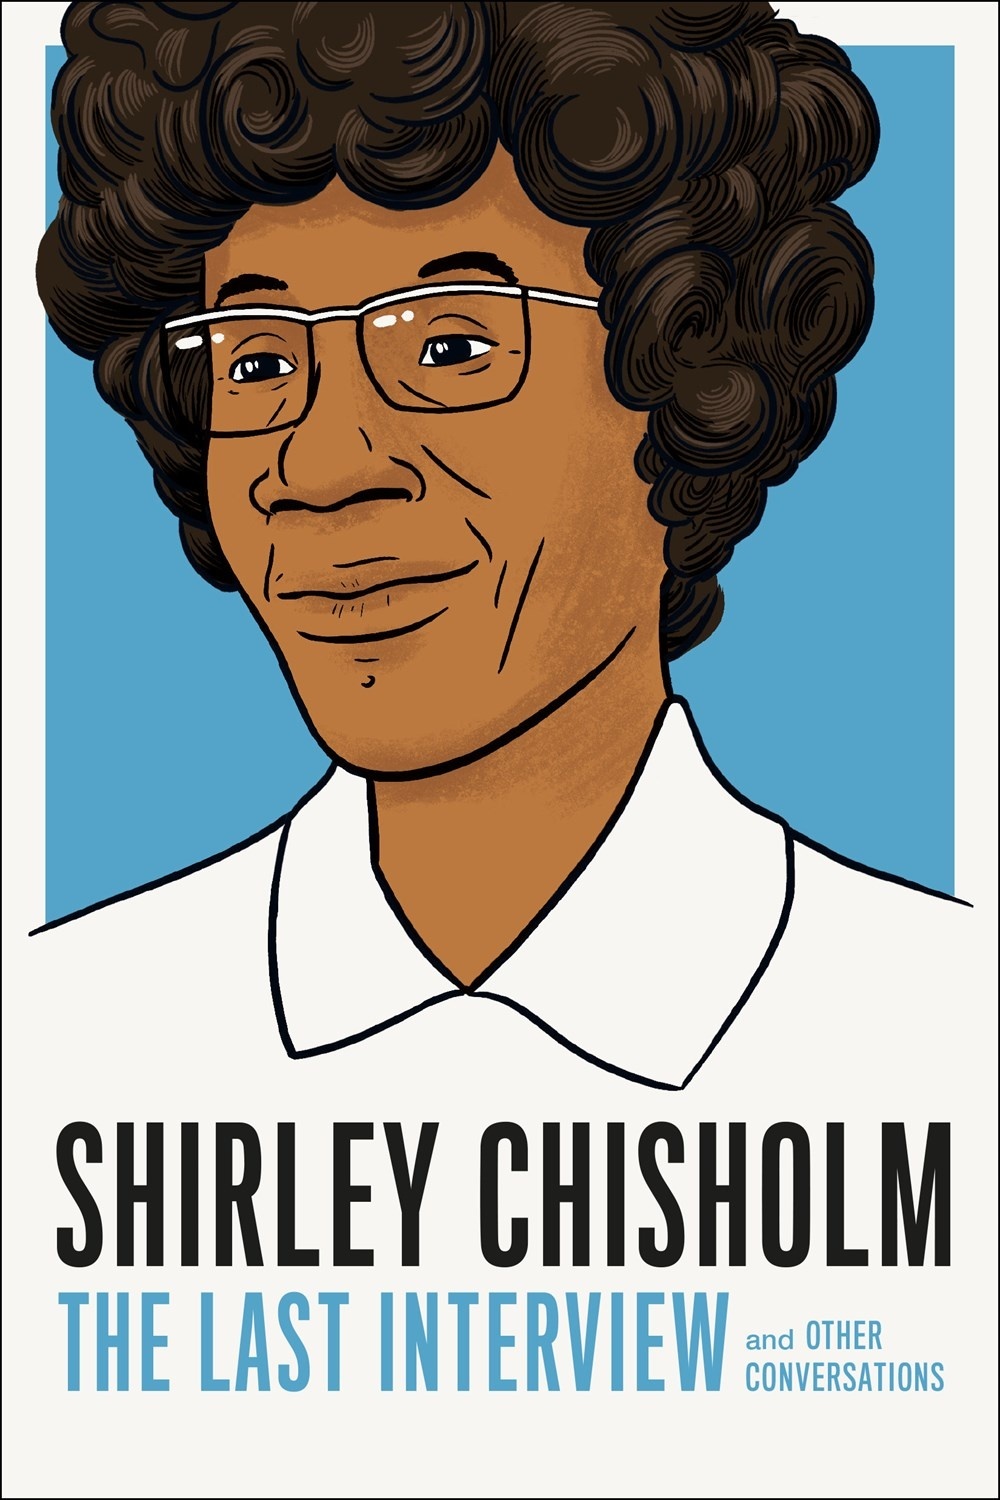 Shirley Chisholm: The Last Interview and other Conversations